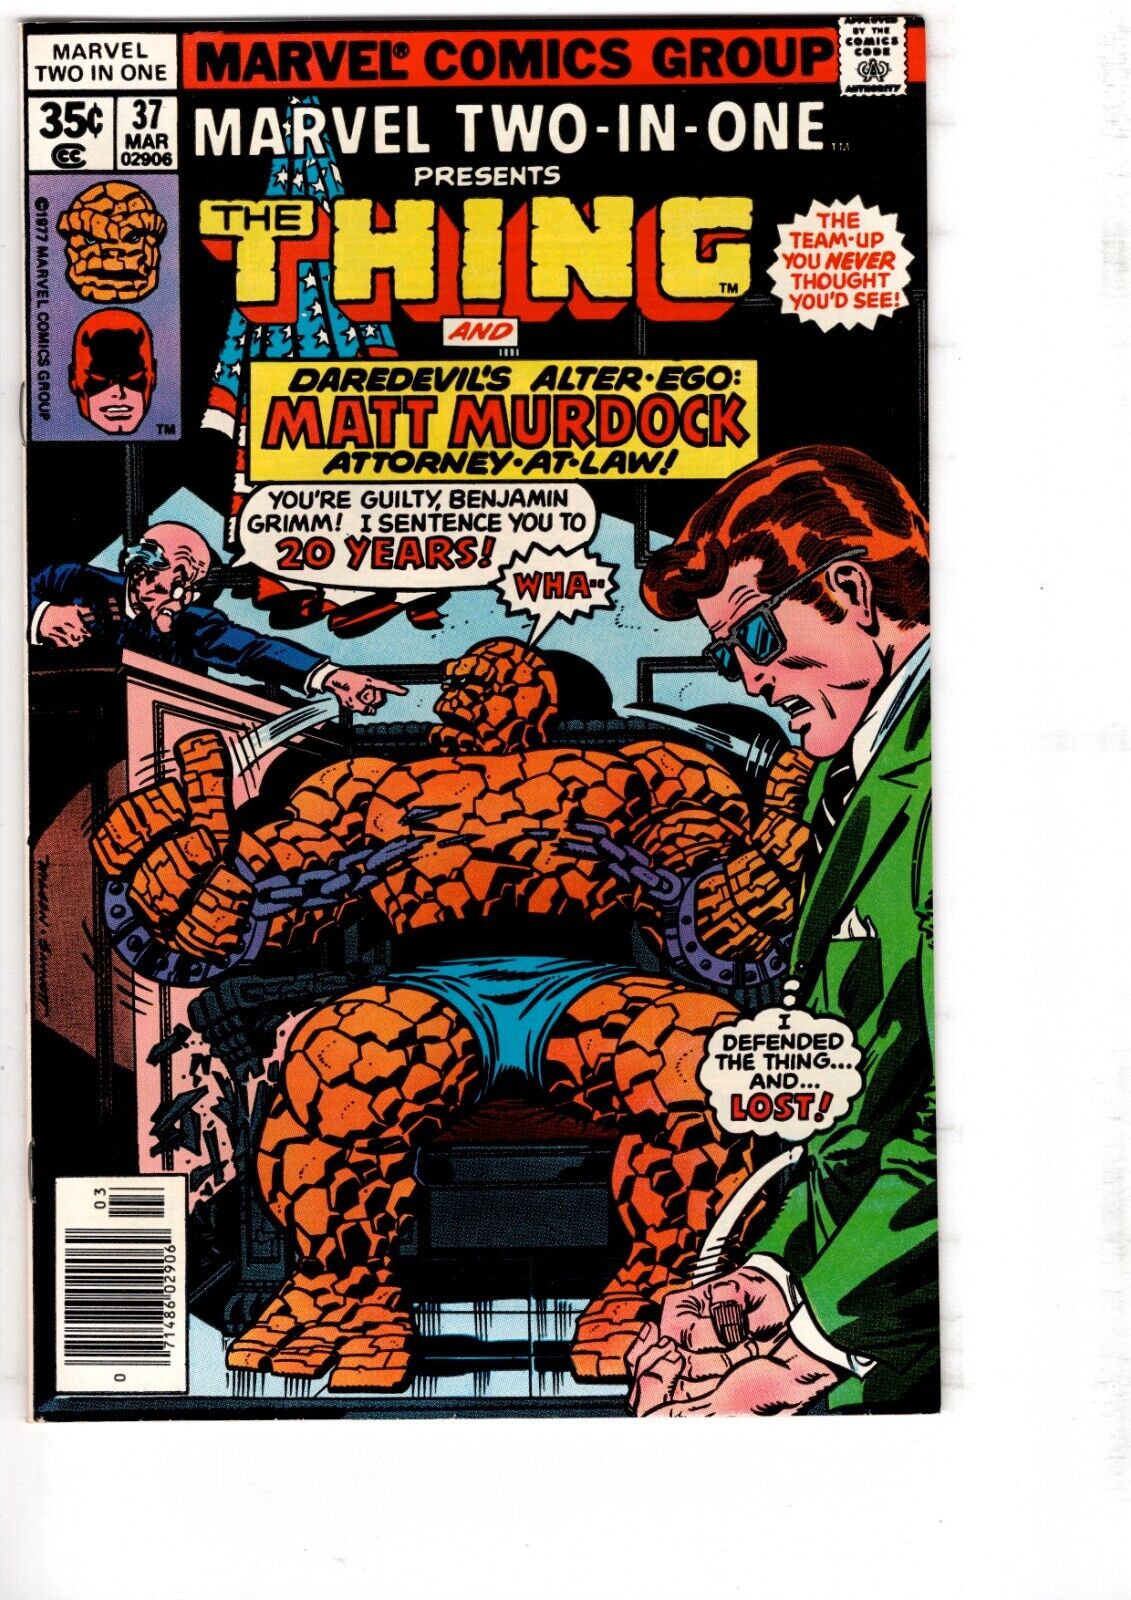 Marvel Two-in-One #37 Mar 1978